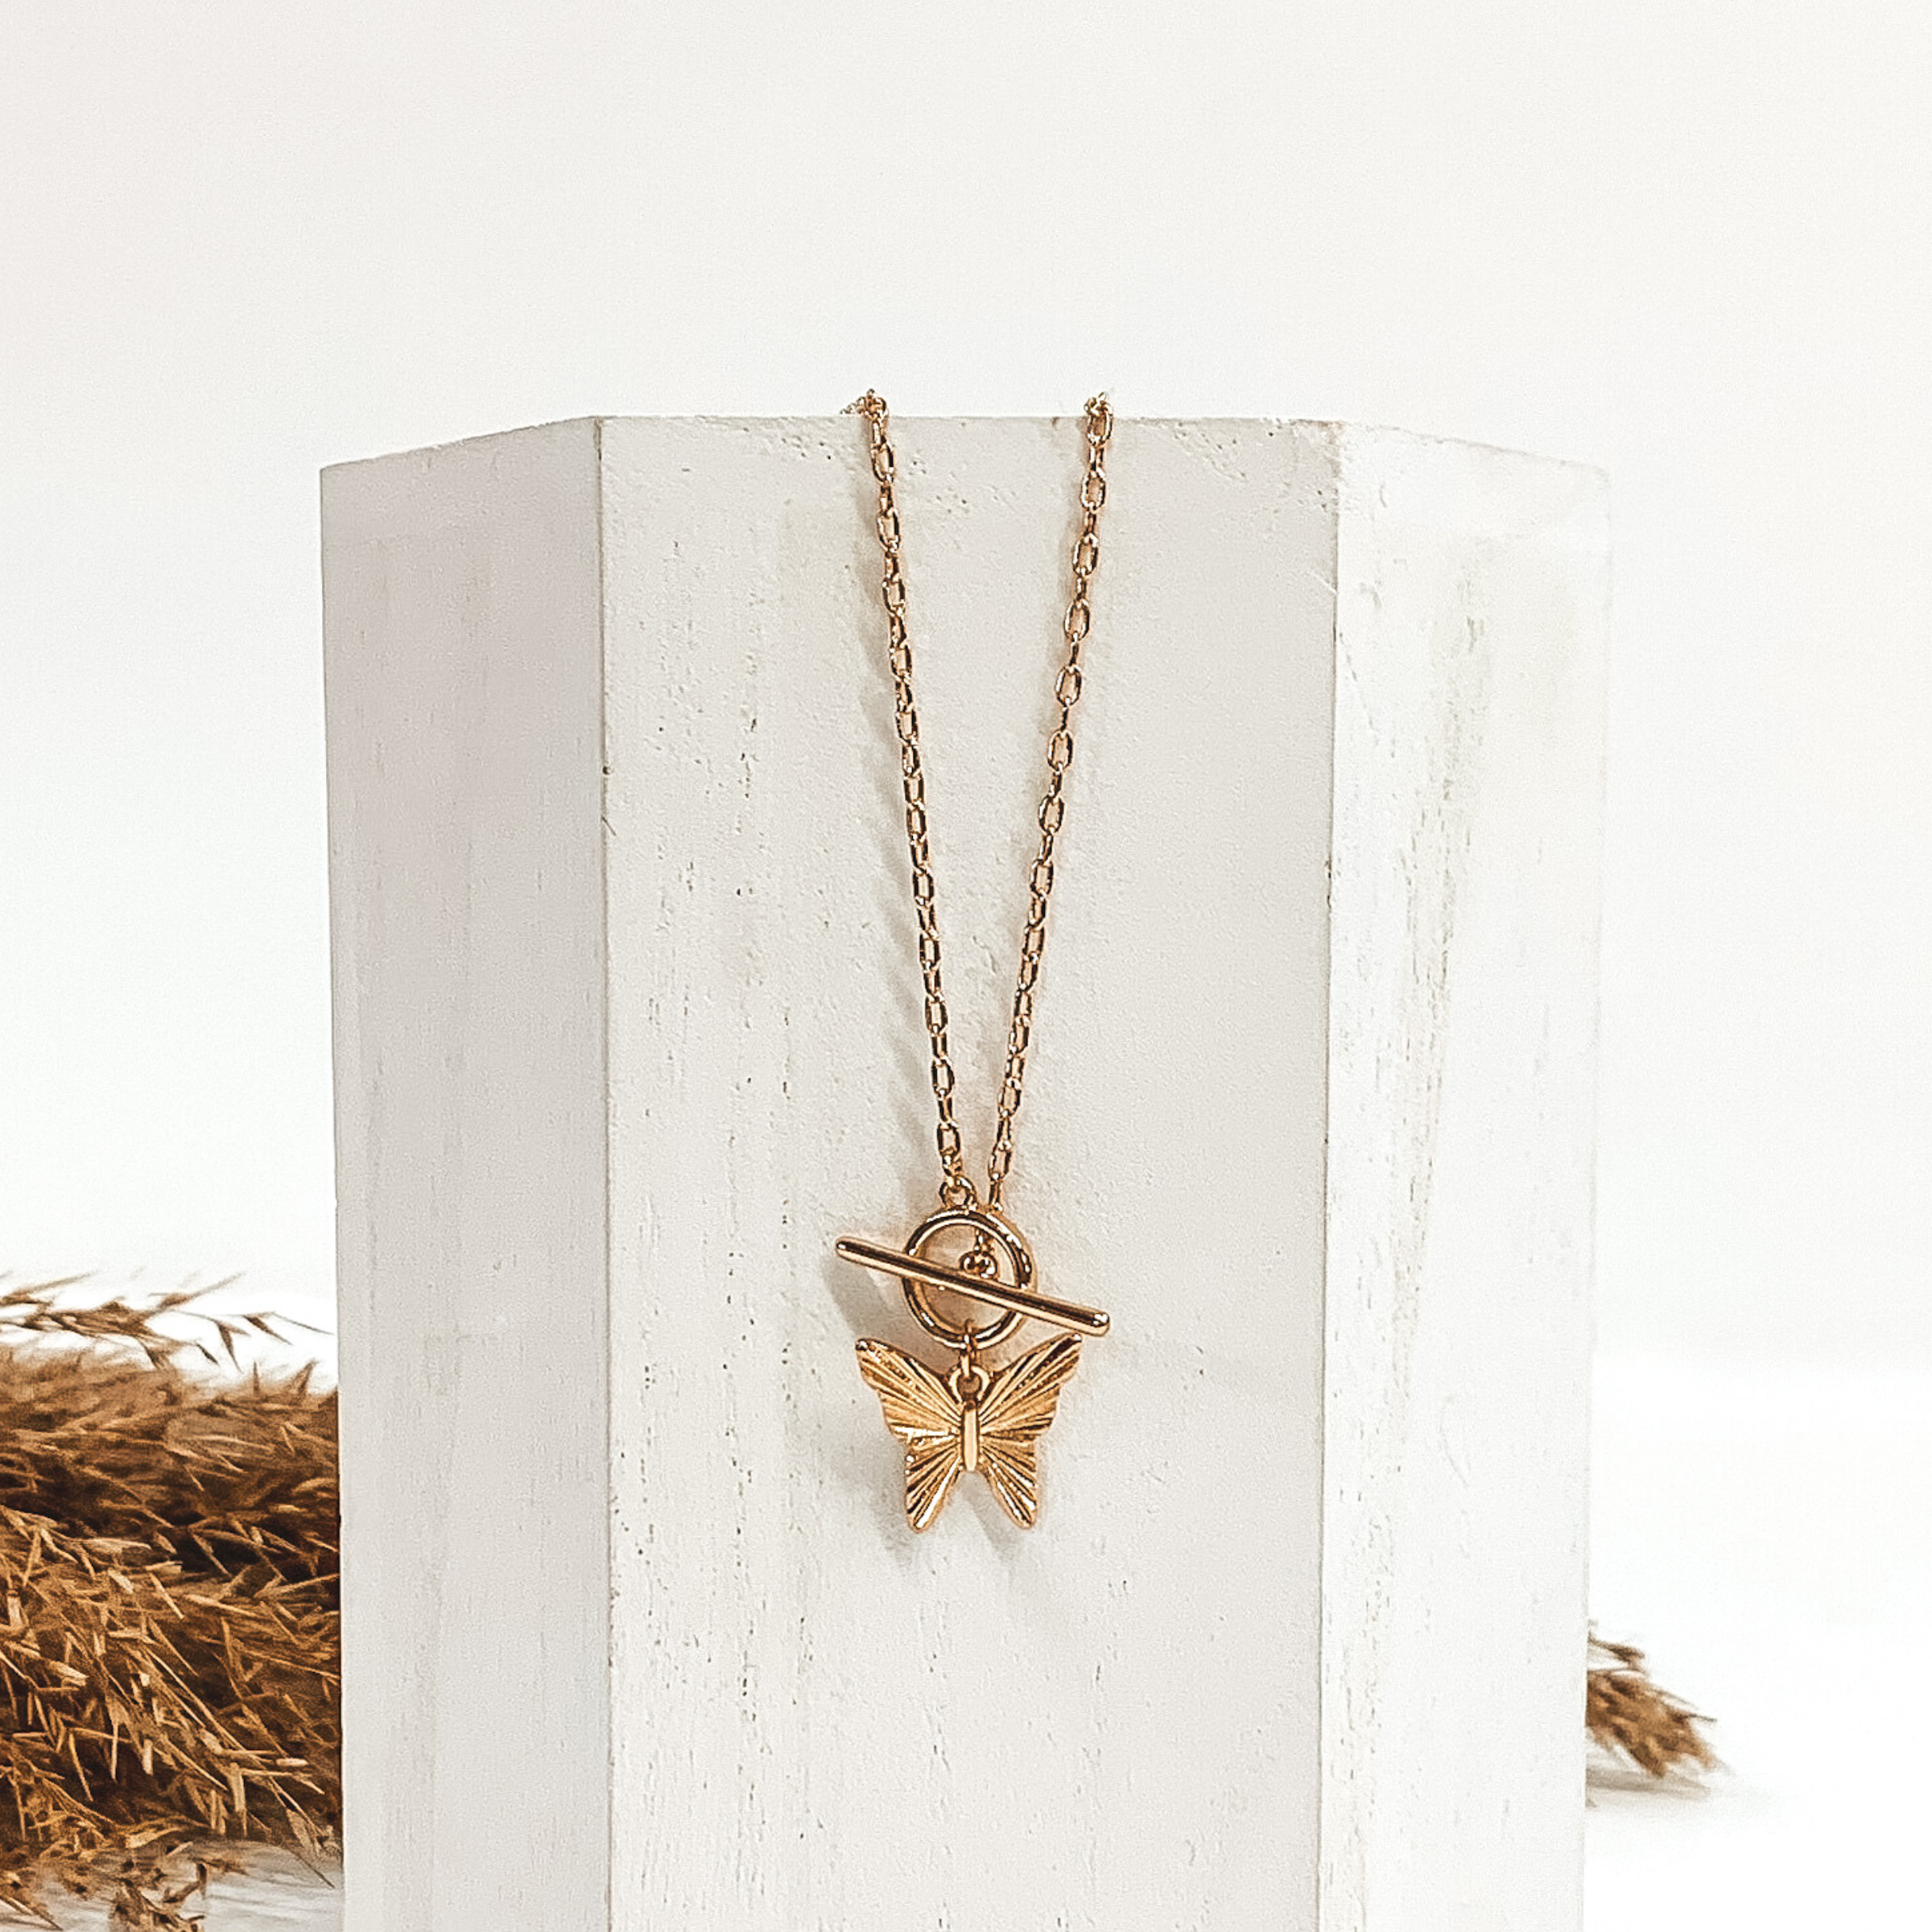 Chain Necklace with a Butterfly Pendant and Toggle Clasp in Gold - Giddy Up Glamour Boutique